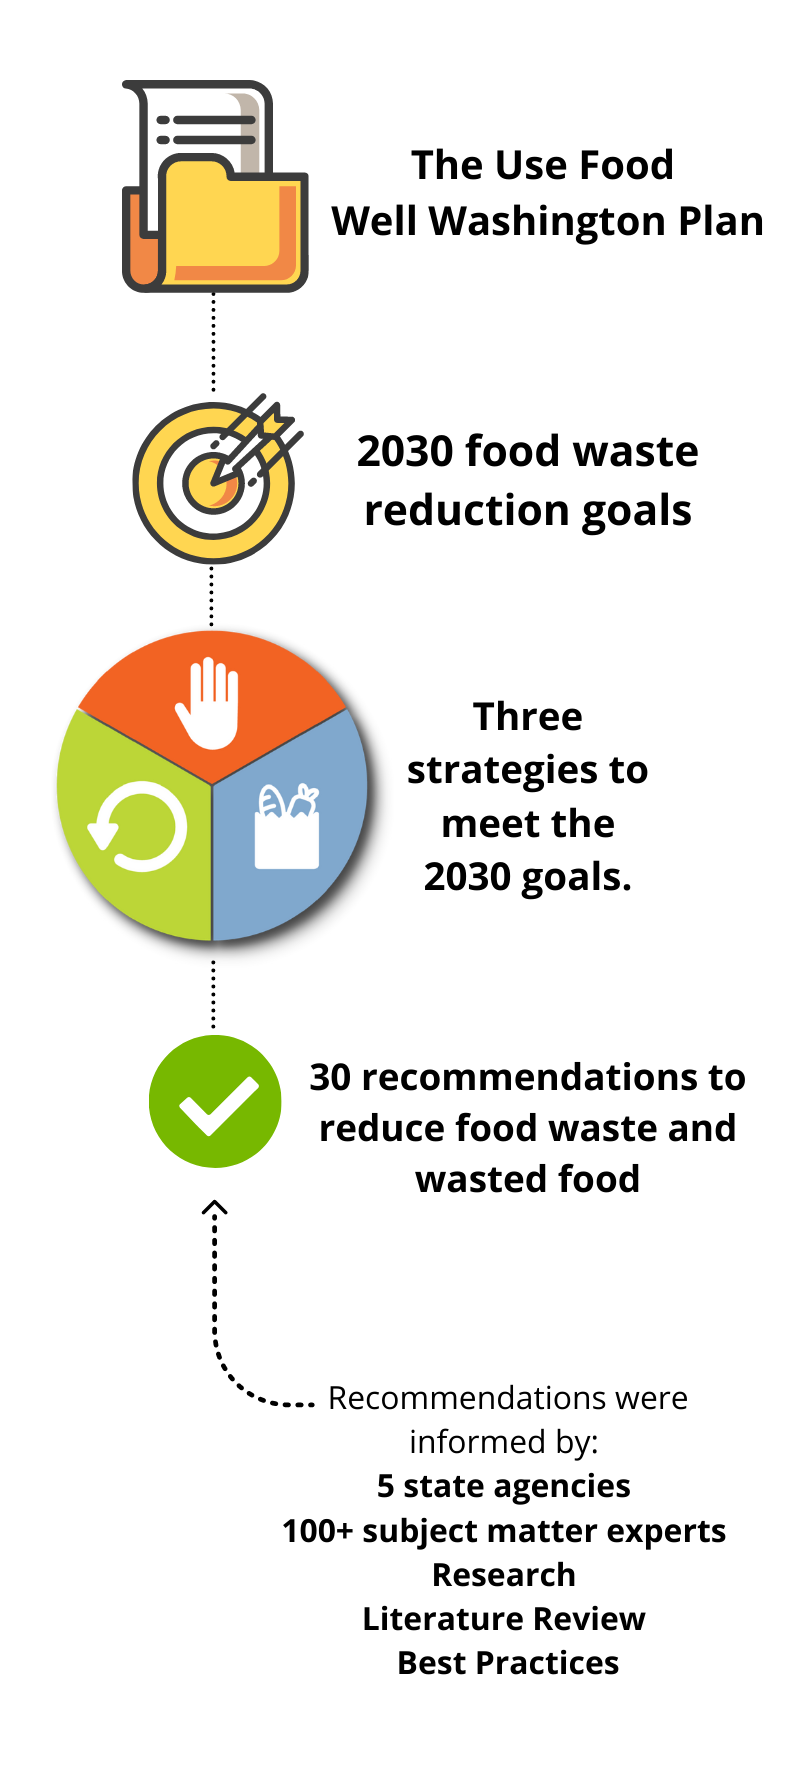 The Use Food Well Washington Plan includes feedback from subject matter experts, research, literature review, and other agencies.